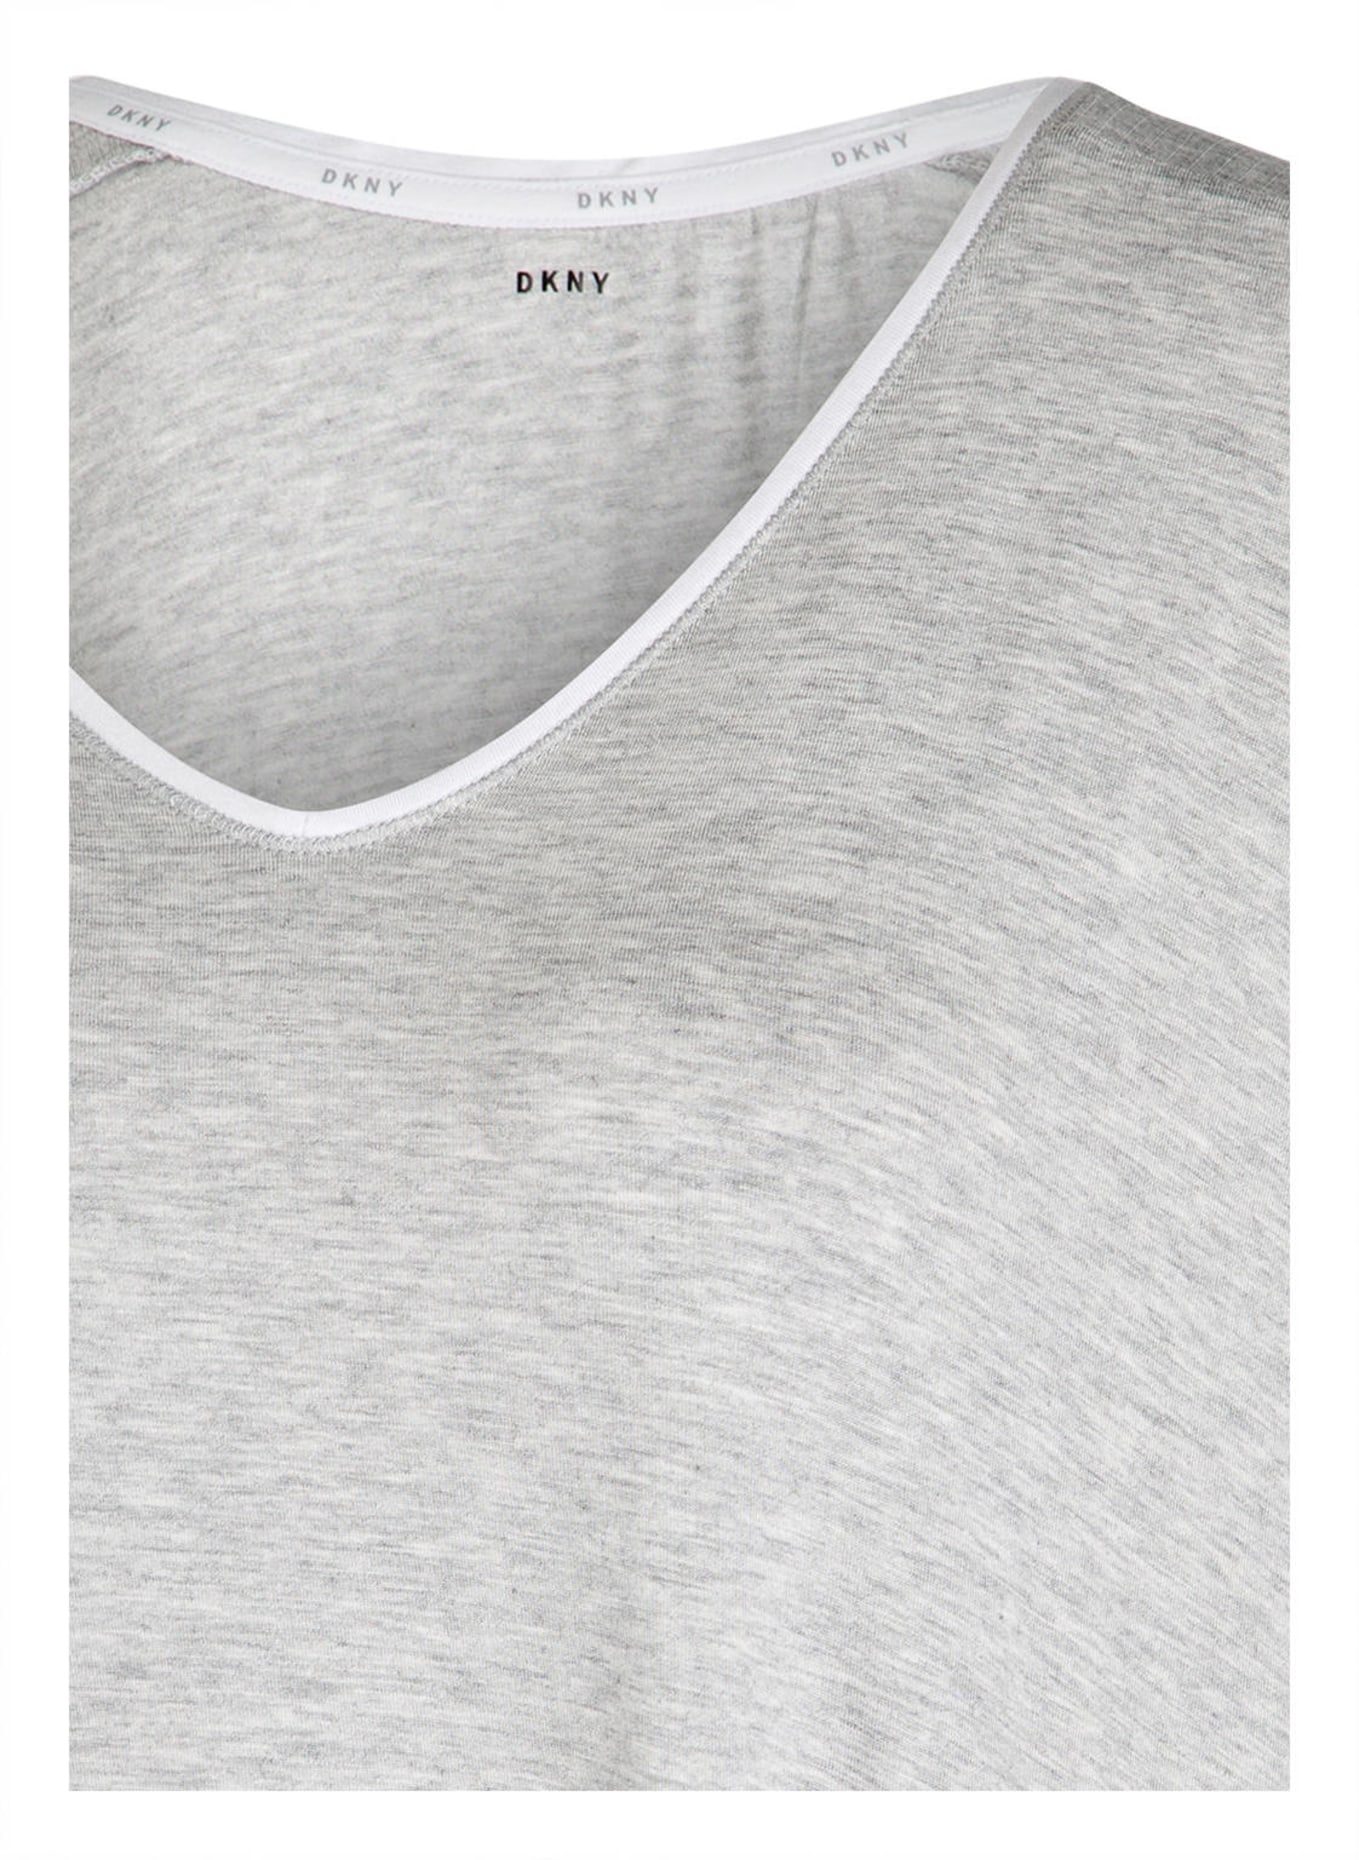 DKNY Nightgown, Color: LIGHT GRAY (Image 3)